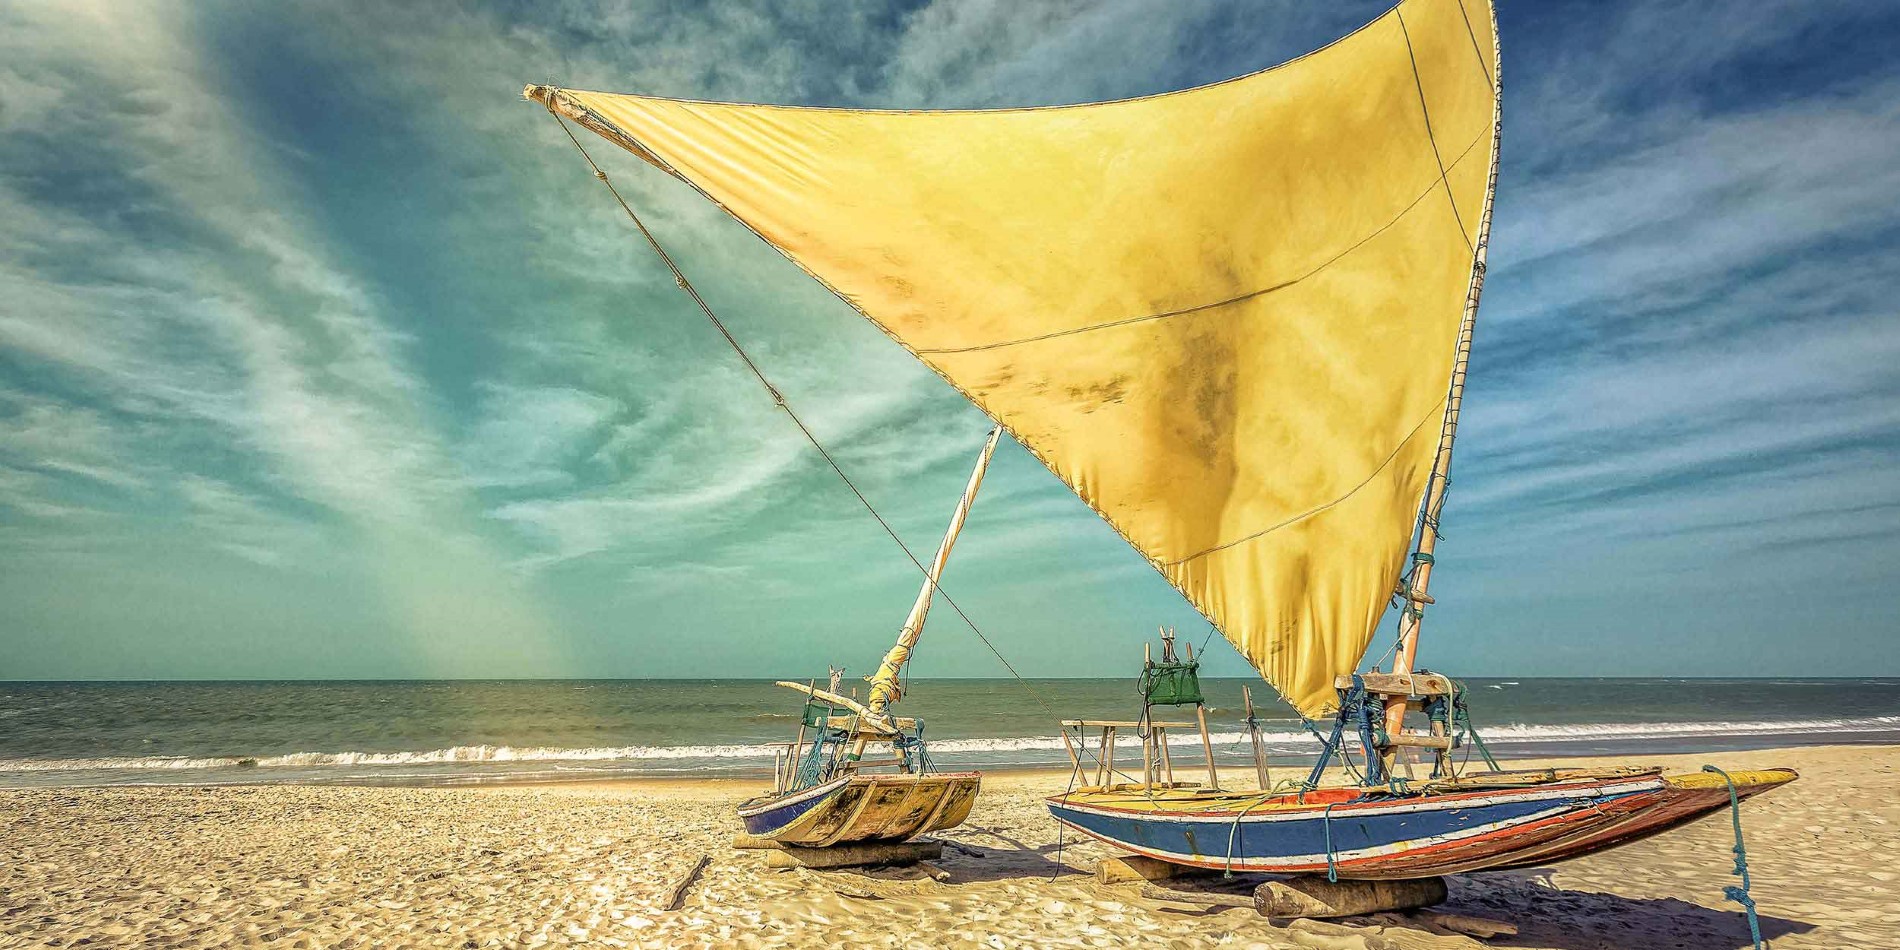 Fishing boat on the beach of Brazil